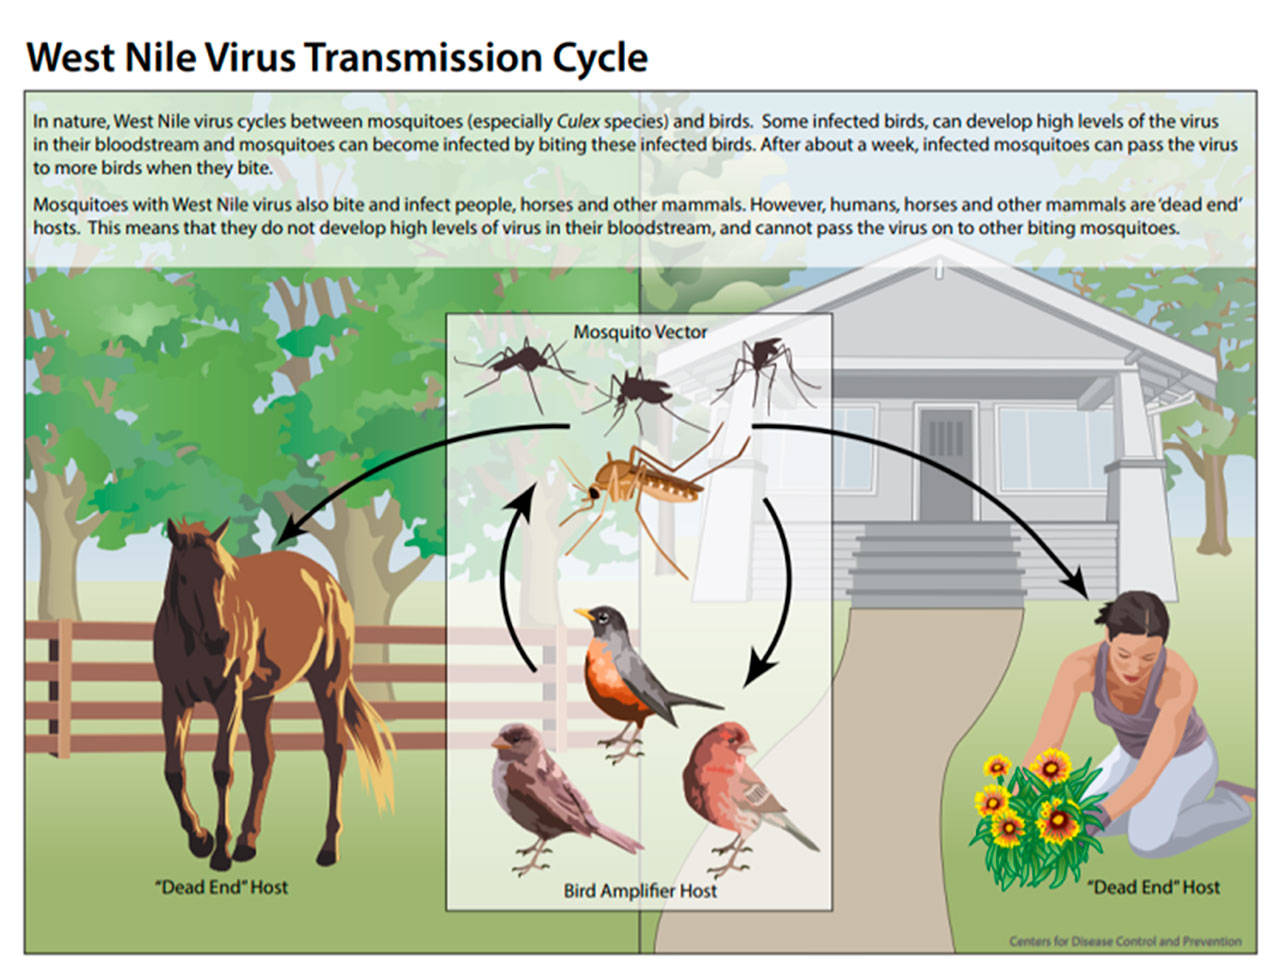 Image courtesy Center for Disease Control.